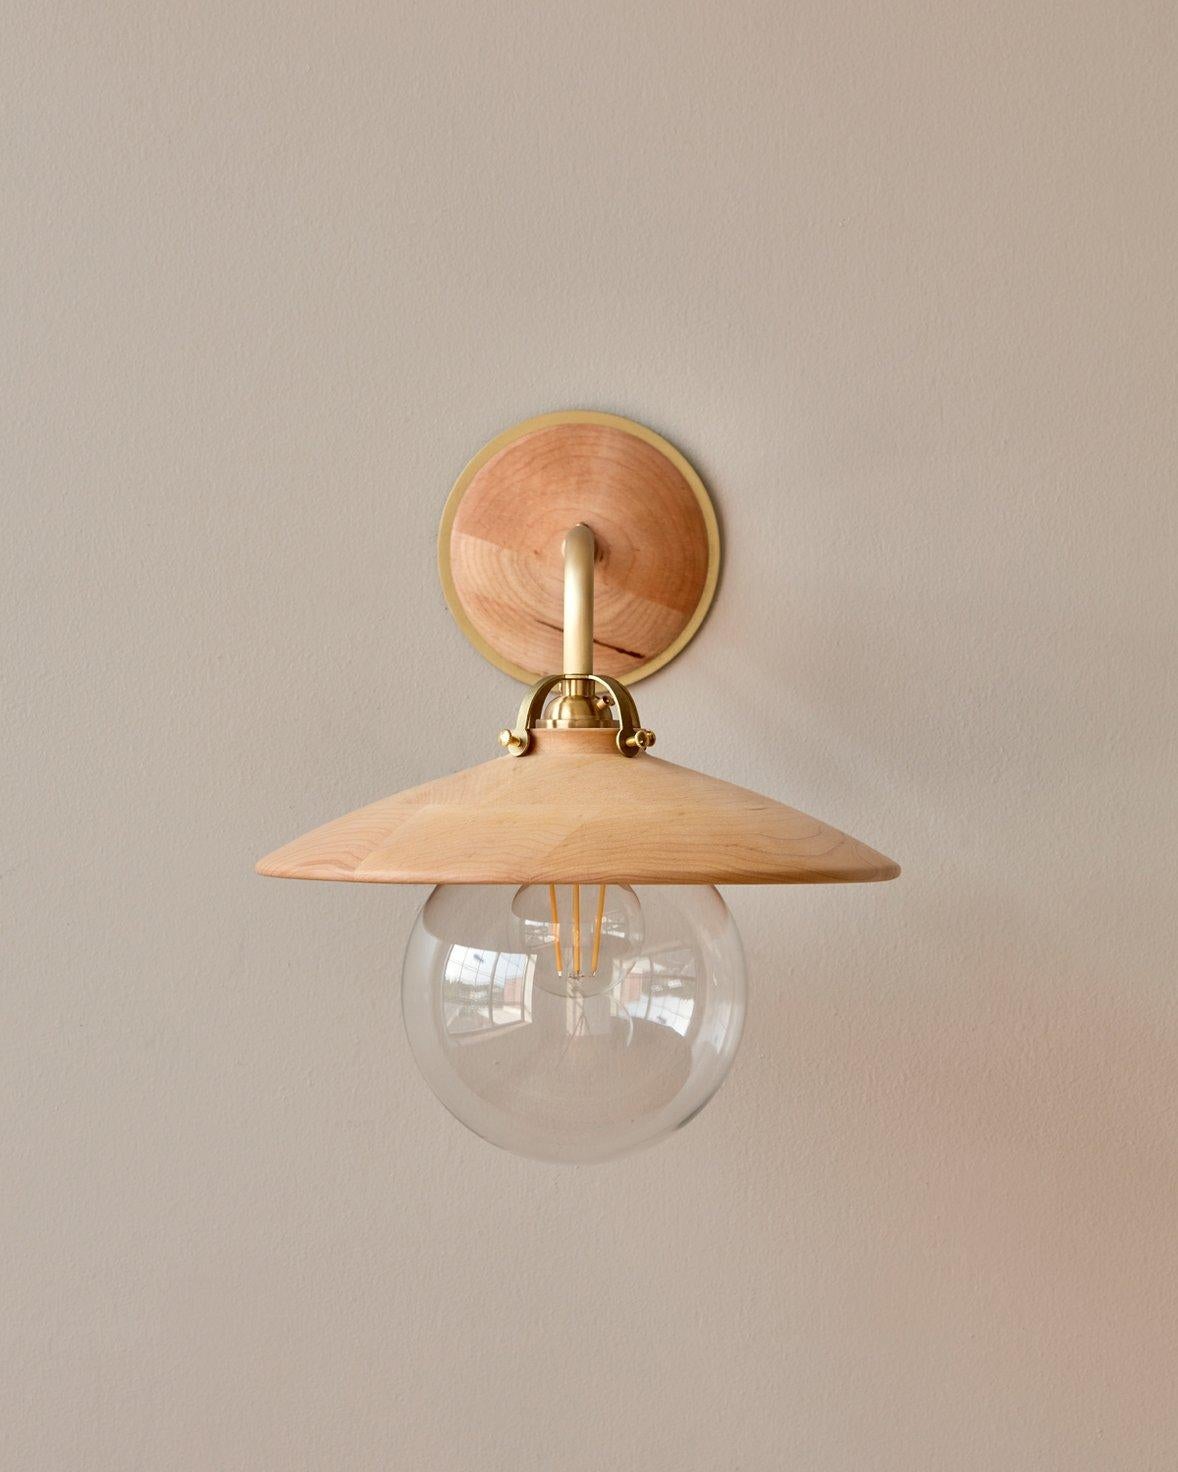 The Edmund sconce adopts the charismatic details from our beloved Edmund Pendant with its distinctive and charming shape. The hand-turned shade and oversized clear globe create a playful silhouette while delicate cut brass fittings and hardware are